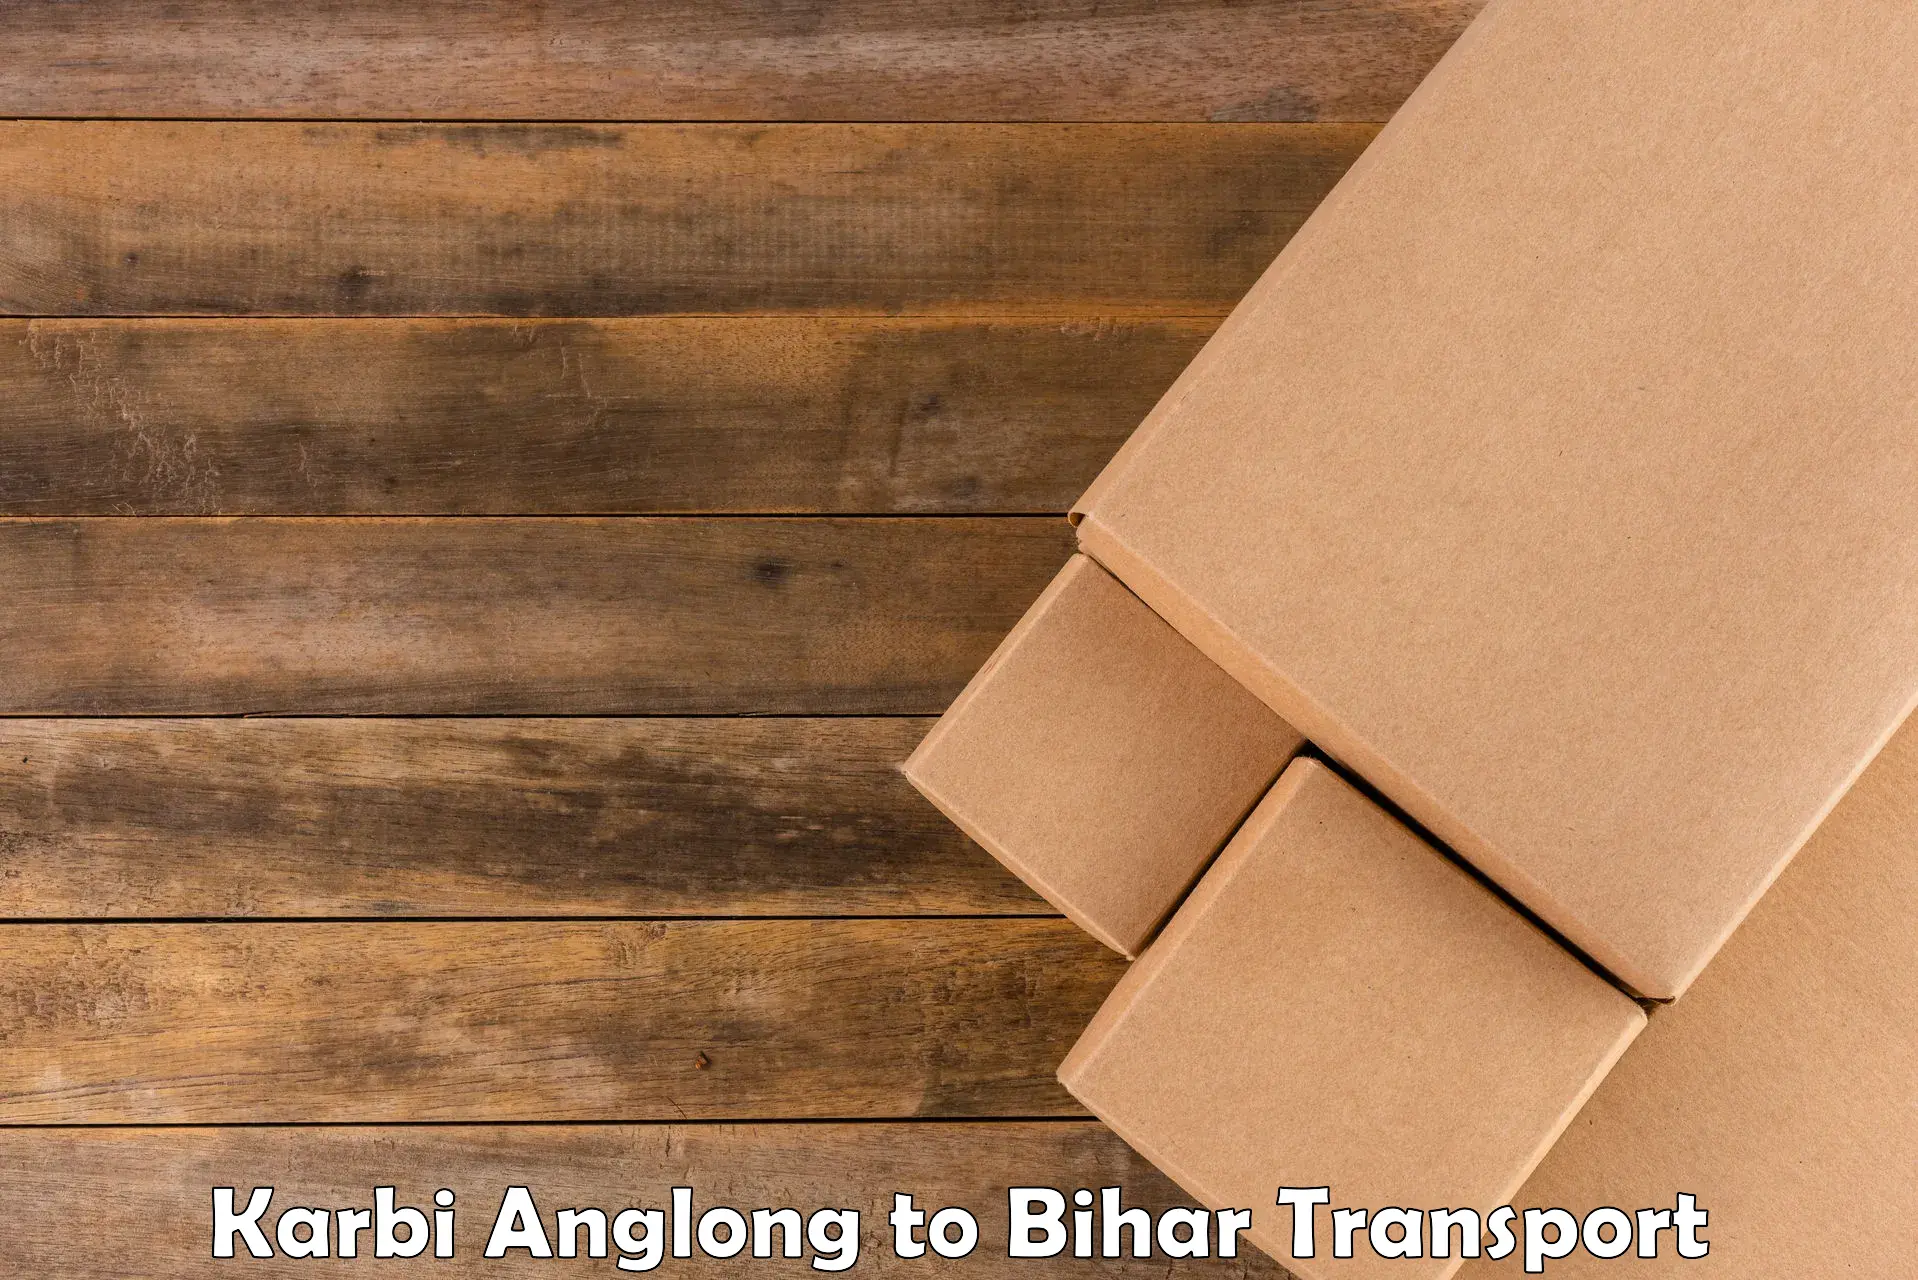 Truck transport companies in India Karbi Anglong to Madanpur